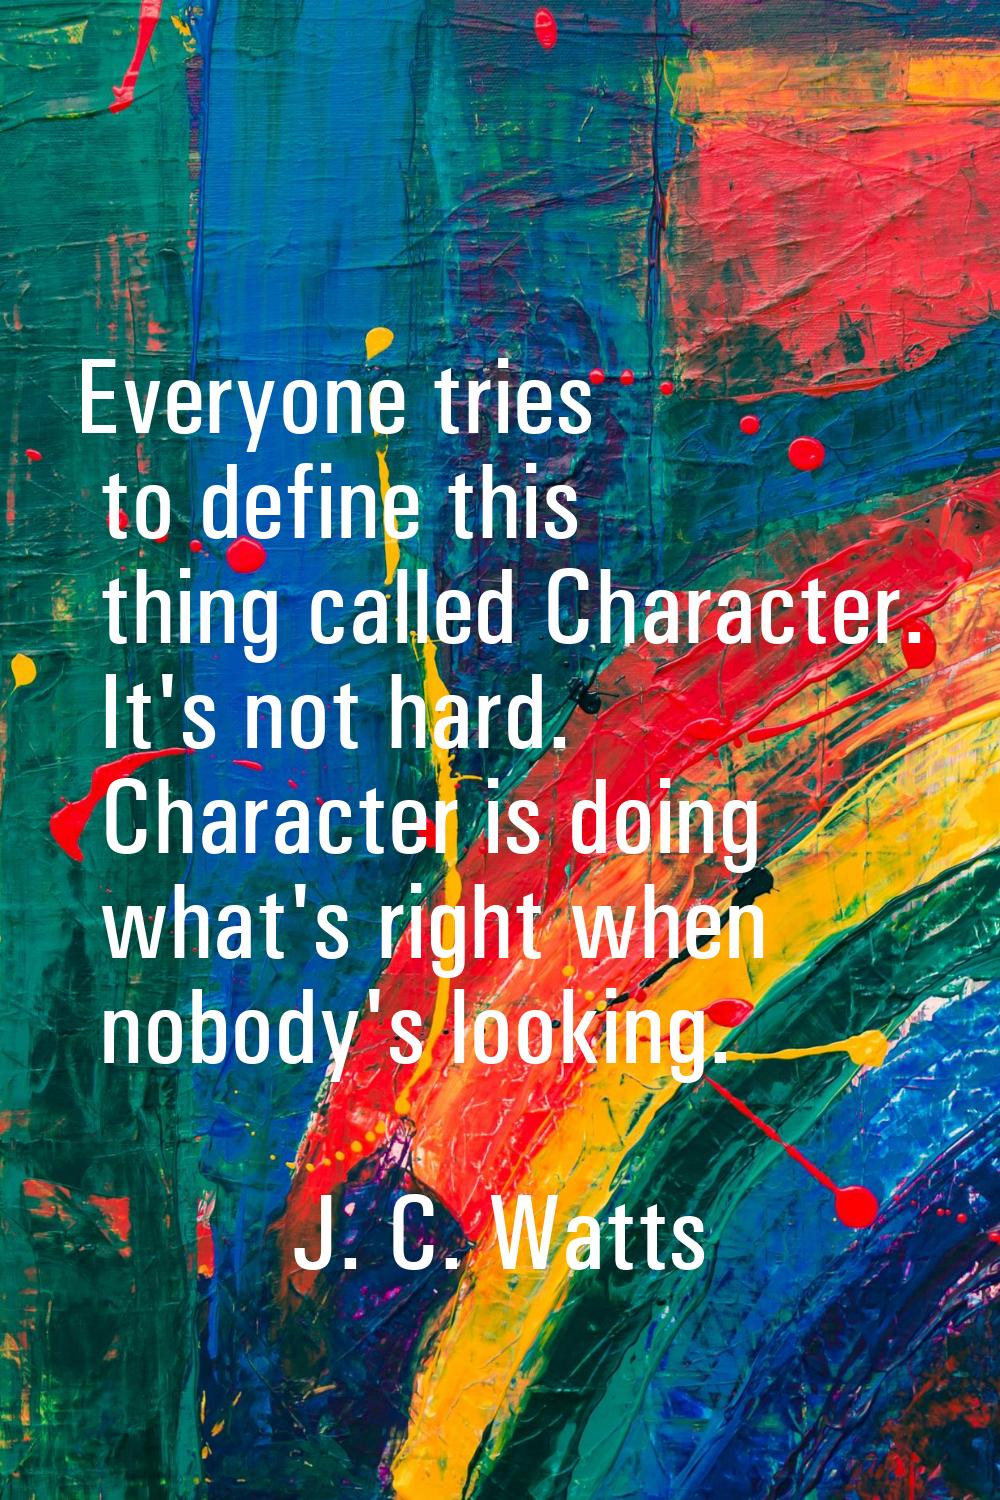 Everyone tries to define this thing called Character. It's not hard. Character is doing what's righ